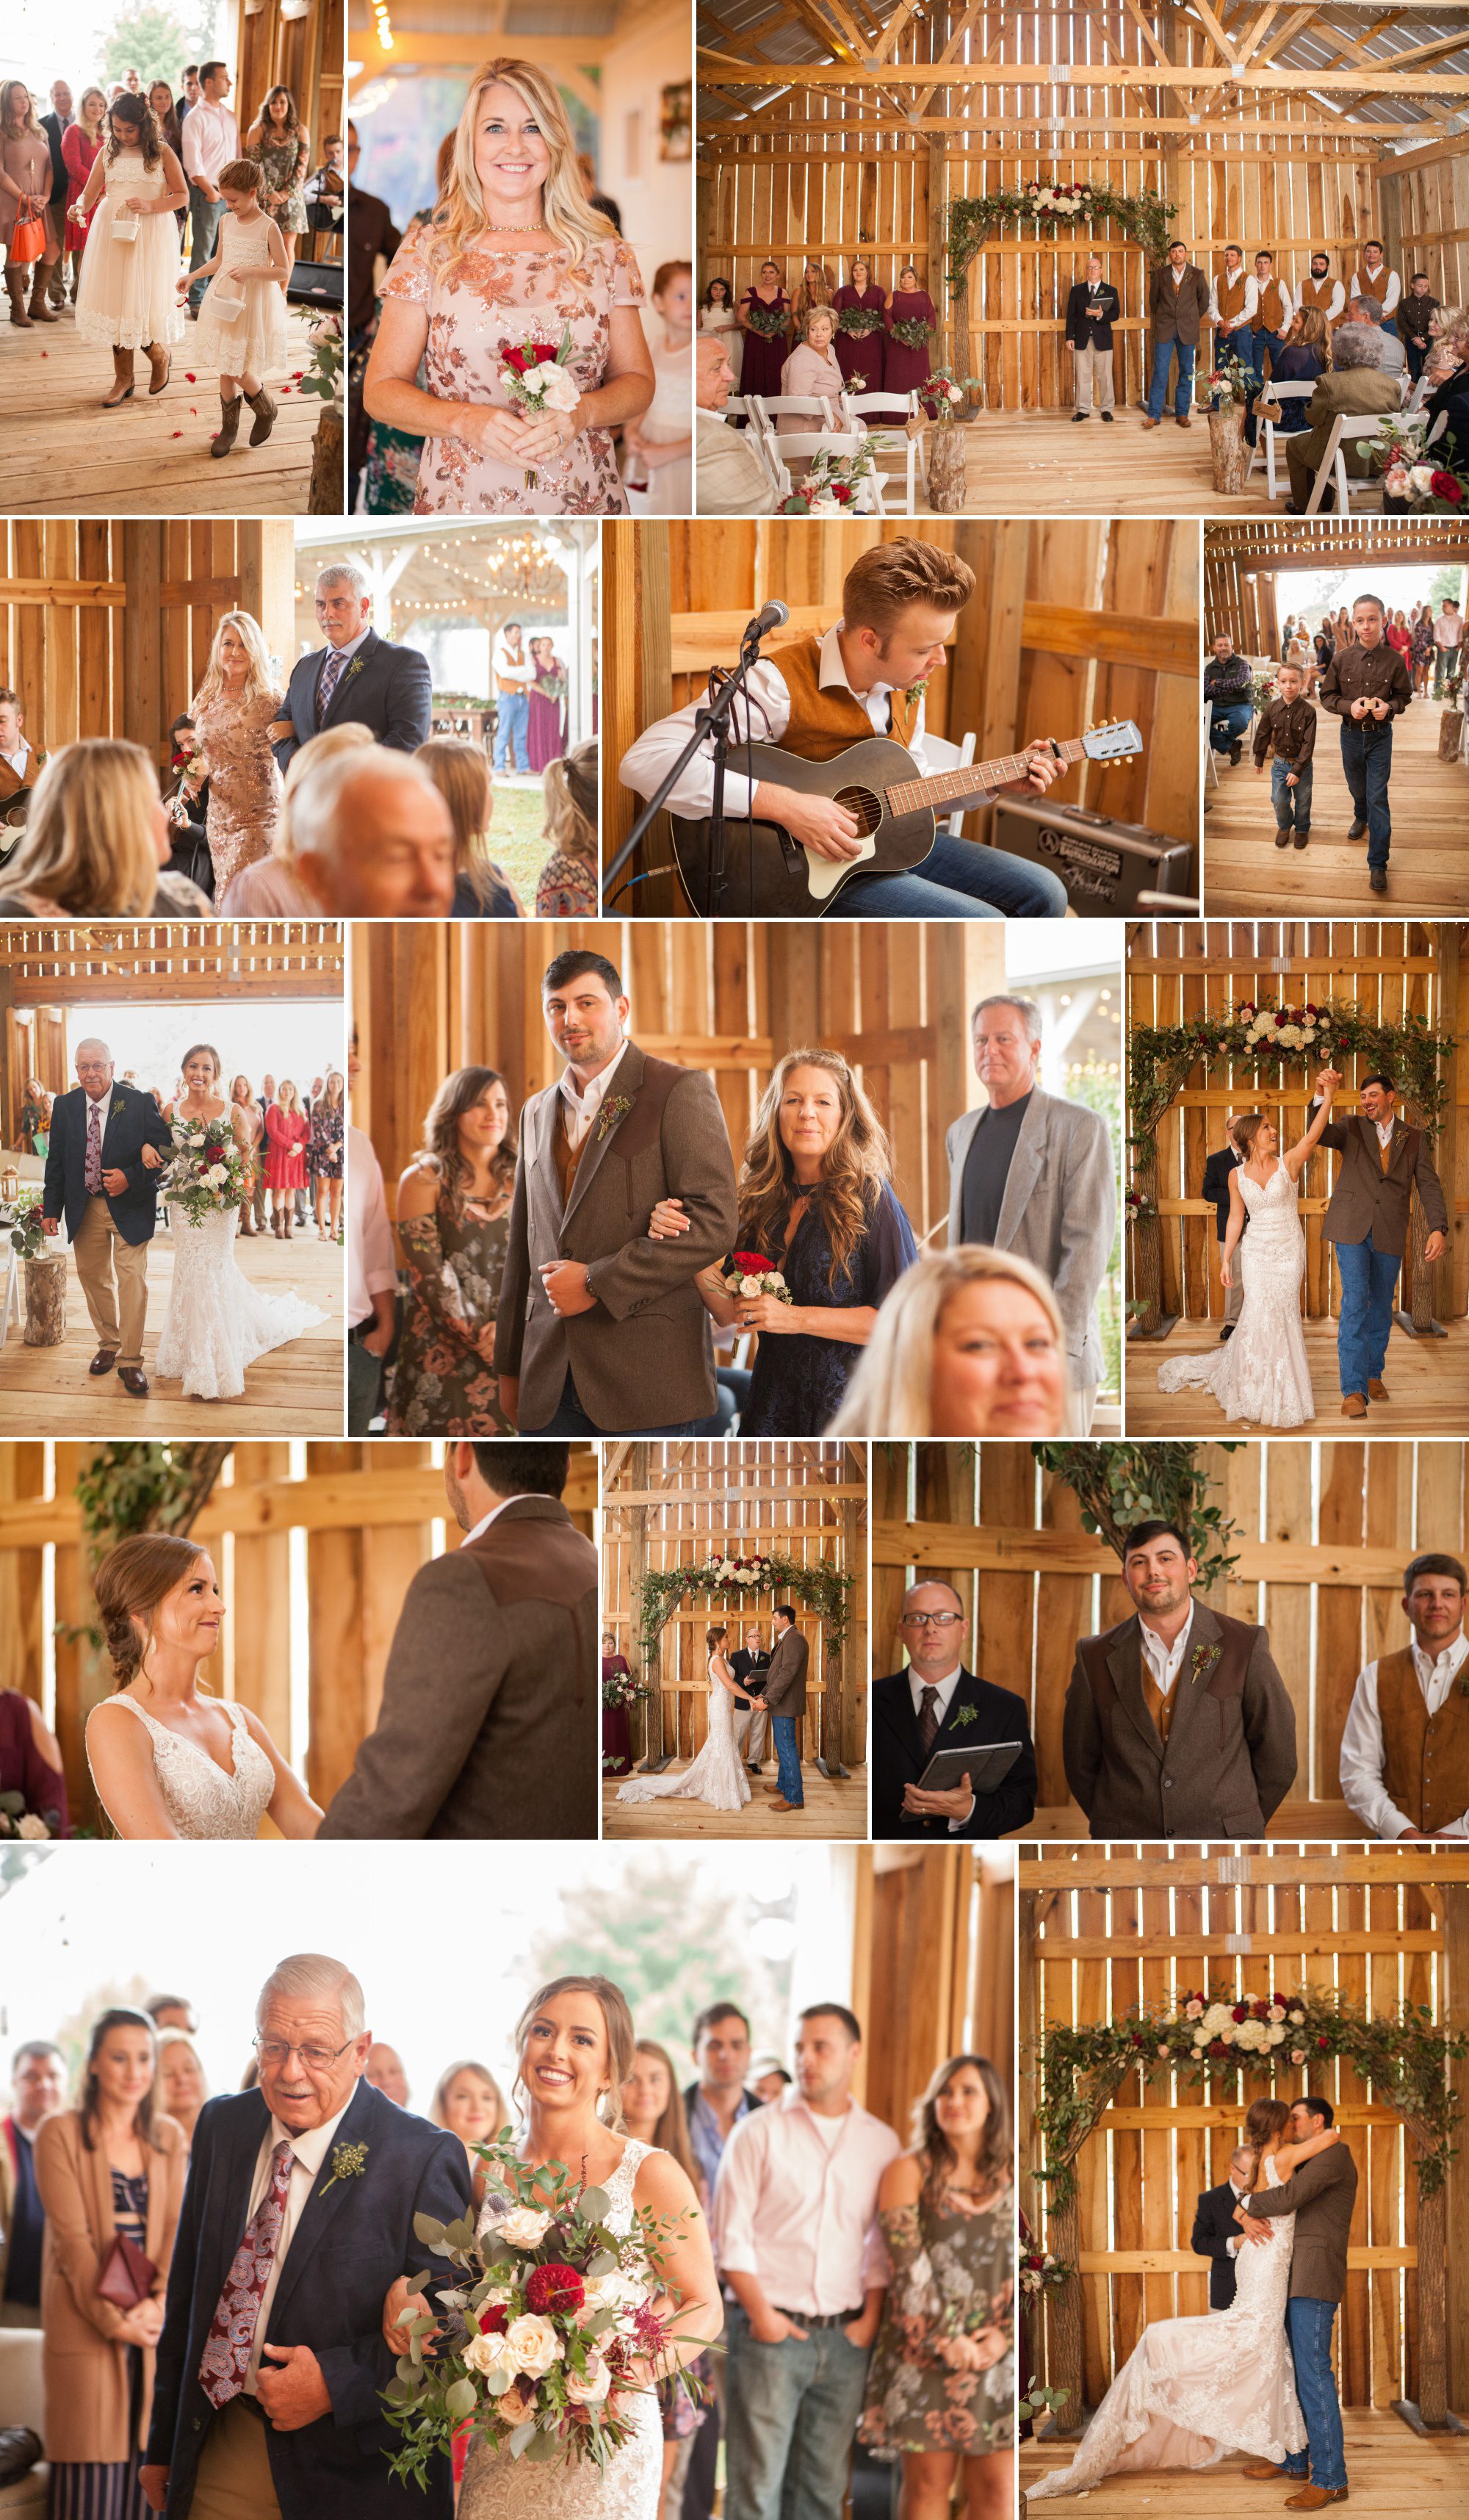 Processional and wedding ceremony photography at Front Porch Farms, Wedding photography by Krista Lee